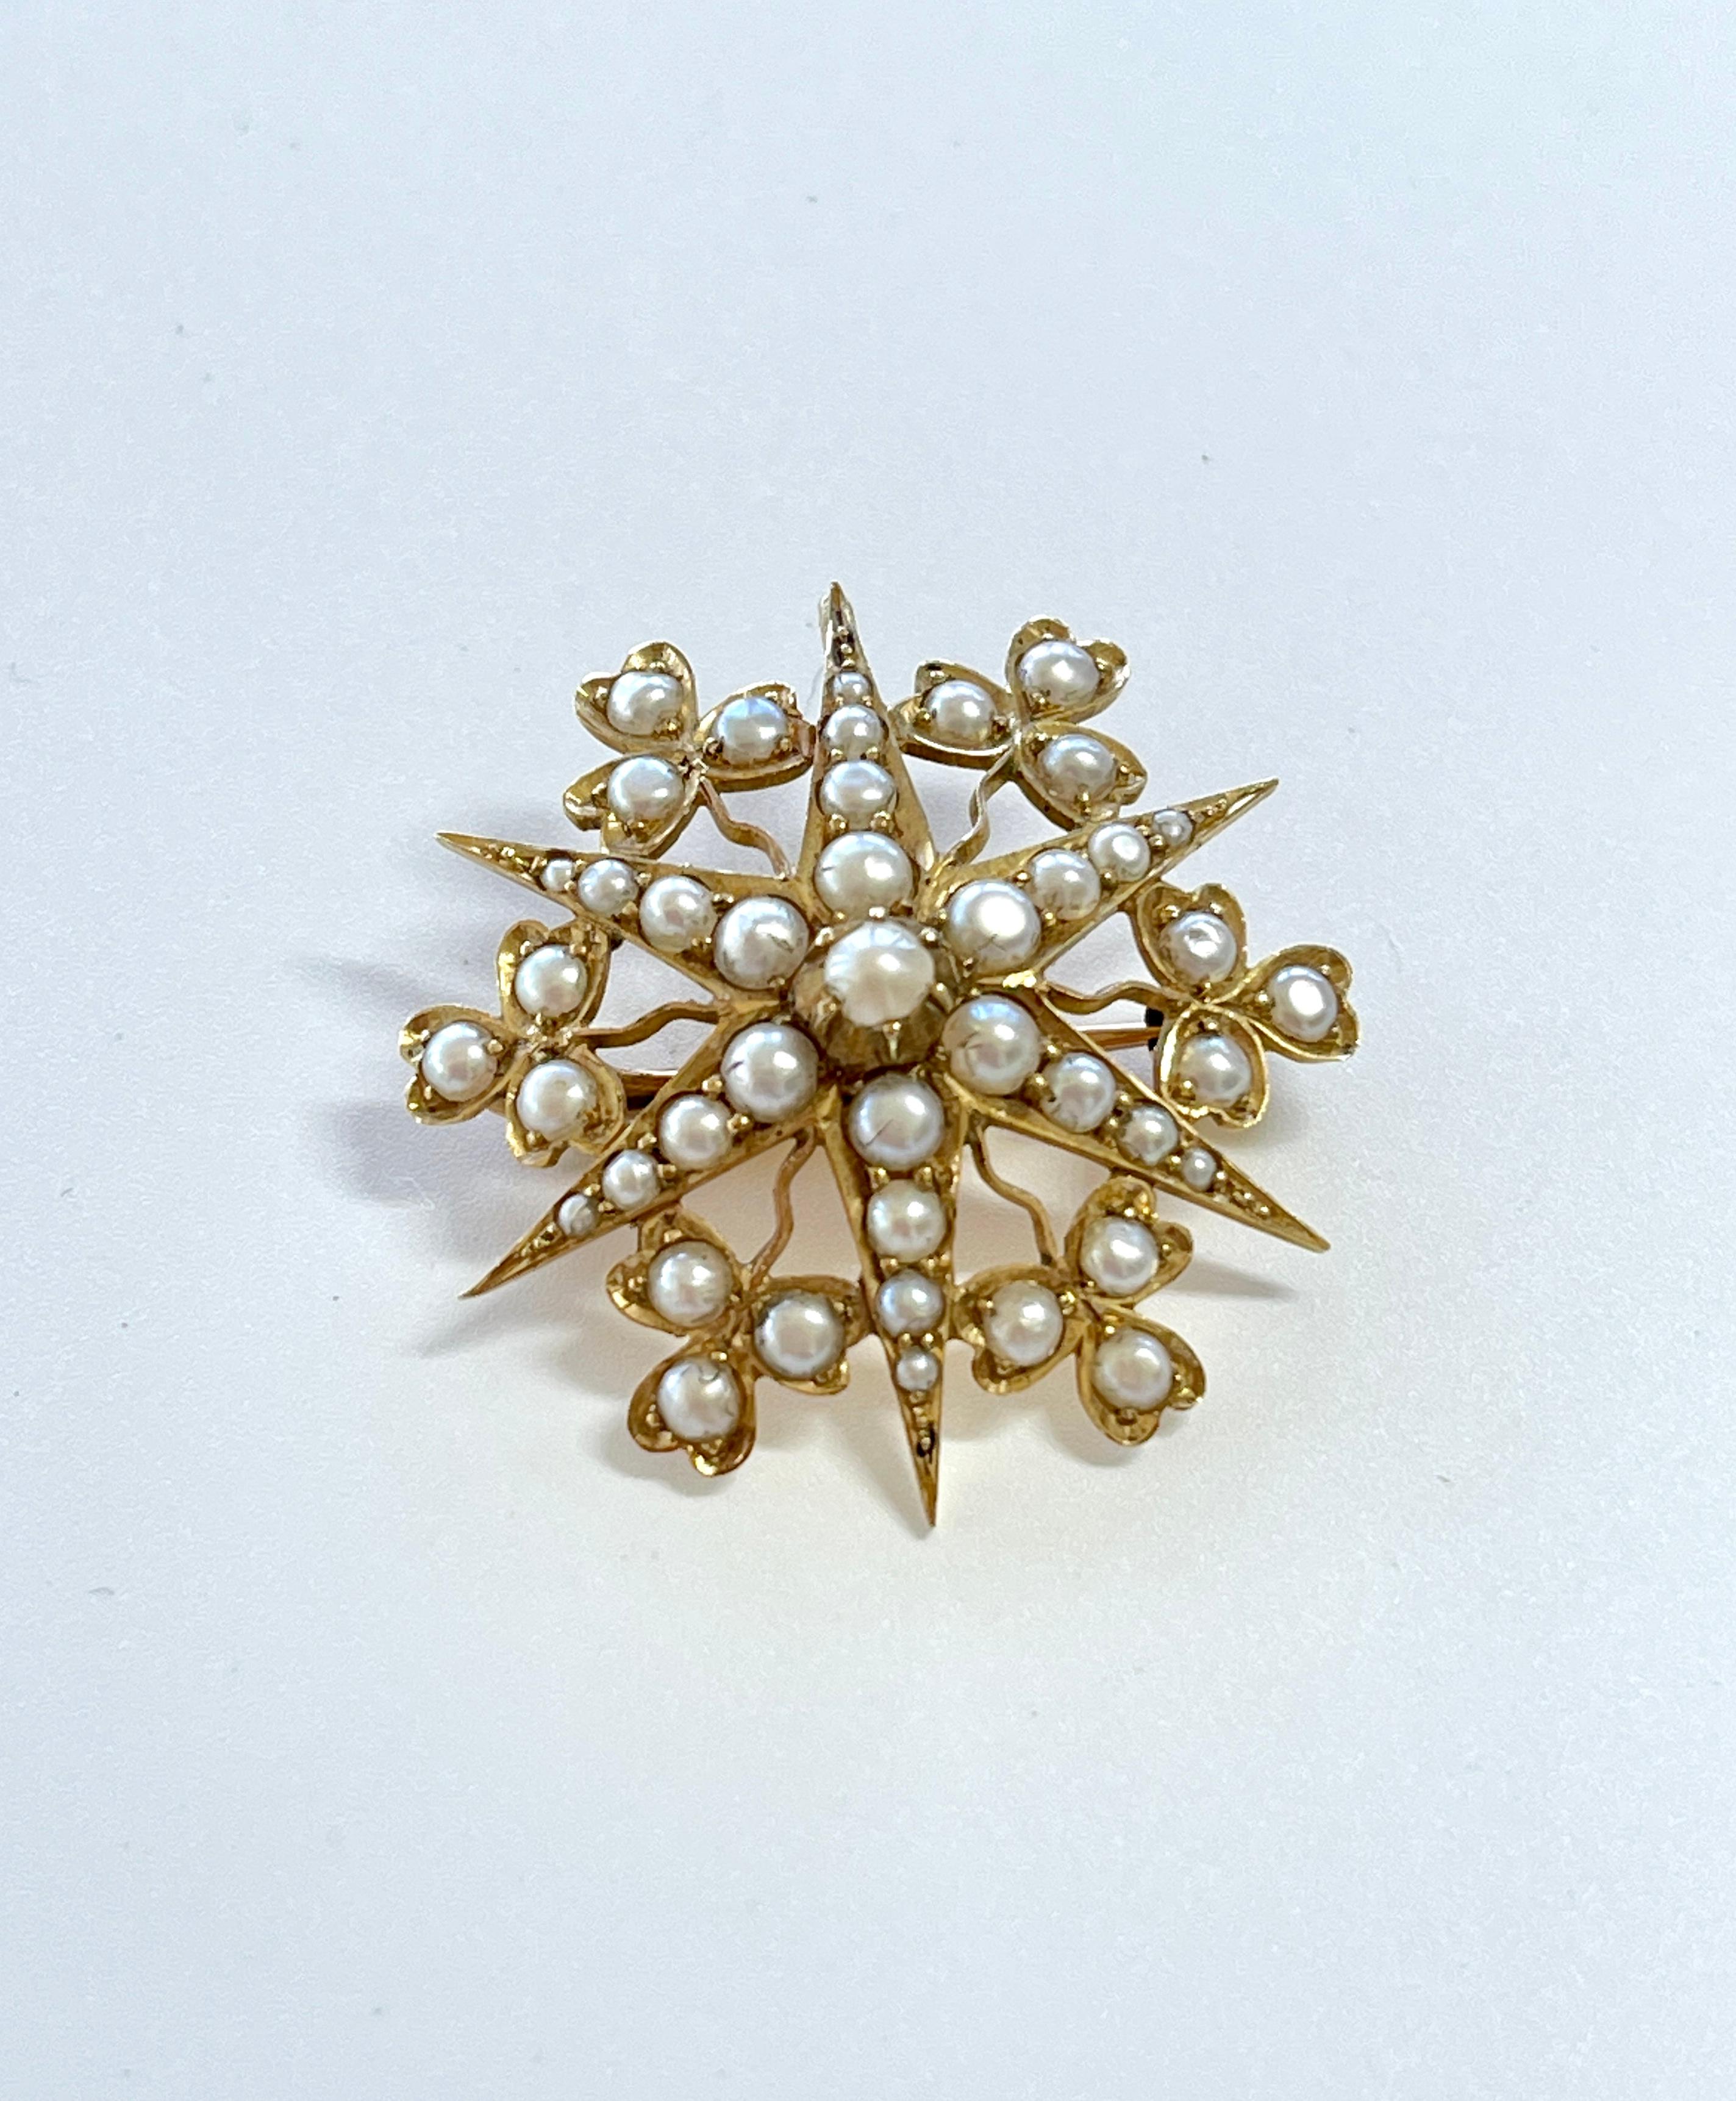 Edwardian c1905 Split Pearl Starburst Heart Brooch 15ct Yellow Gold  In Excellent Condition For Sale In Mona Vale, NSW